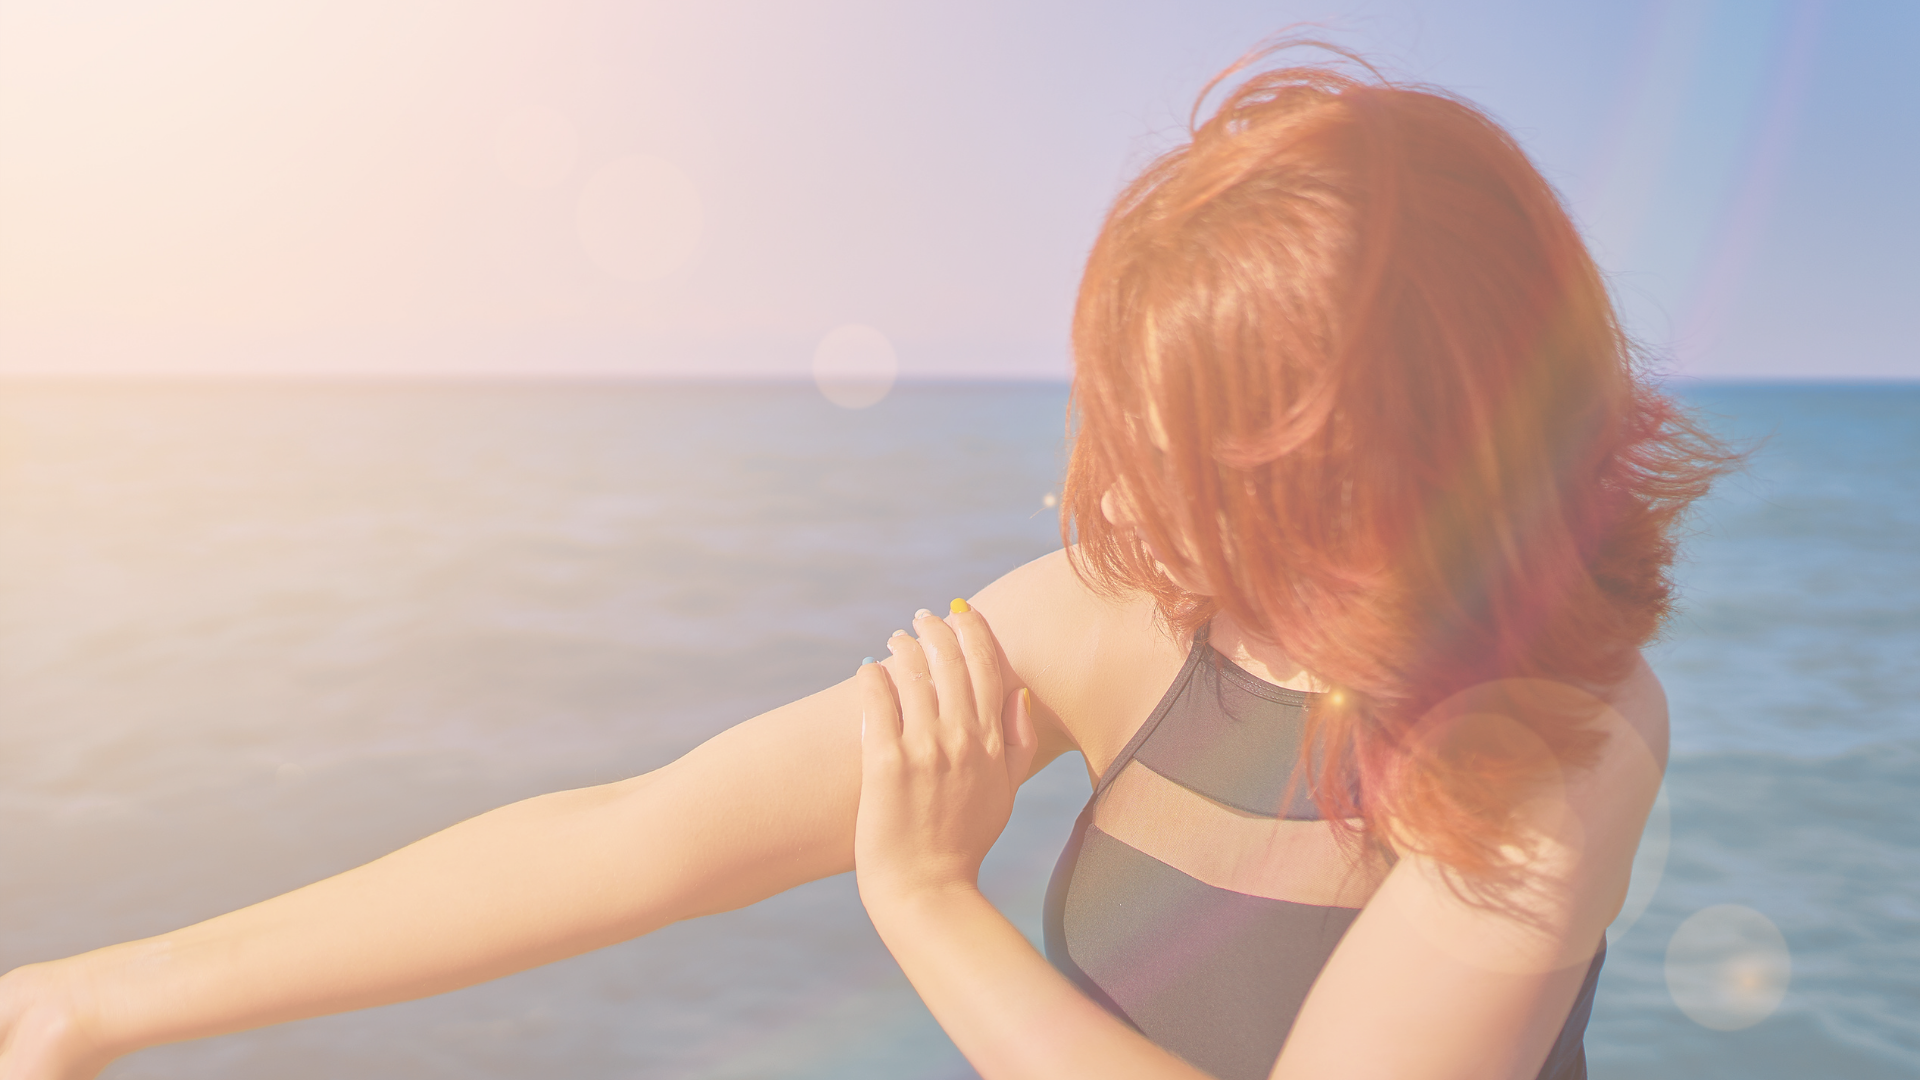 6 Facts About Sunscreen and Sun Protection for Redheads